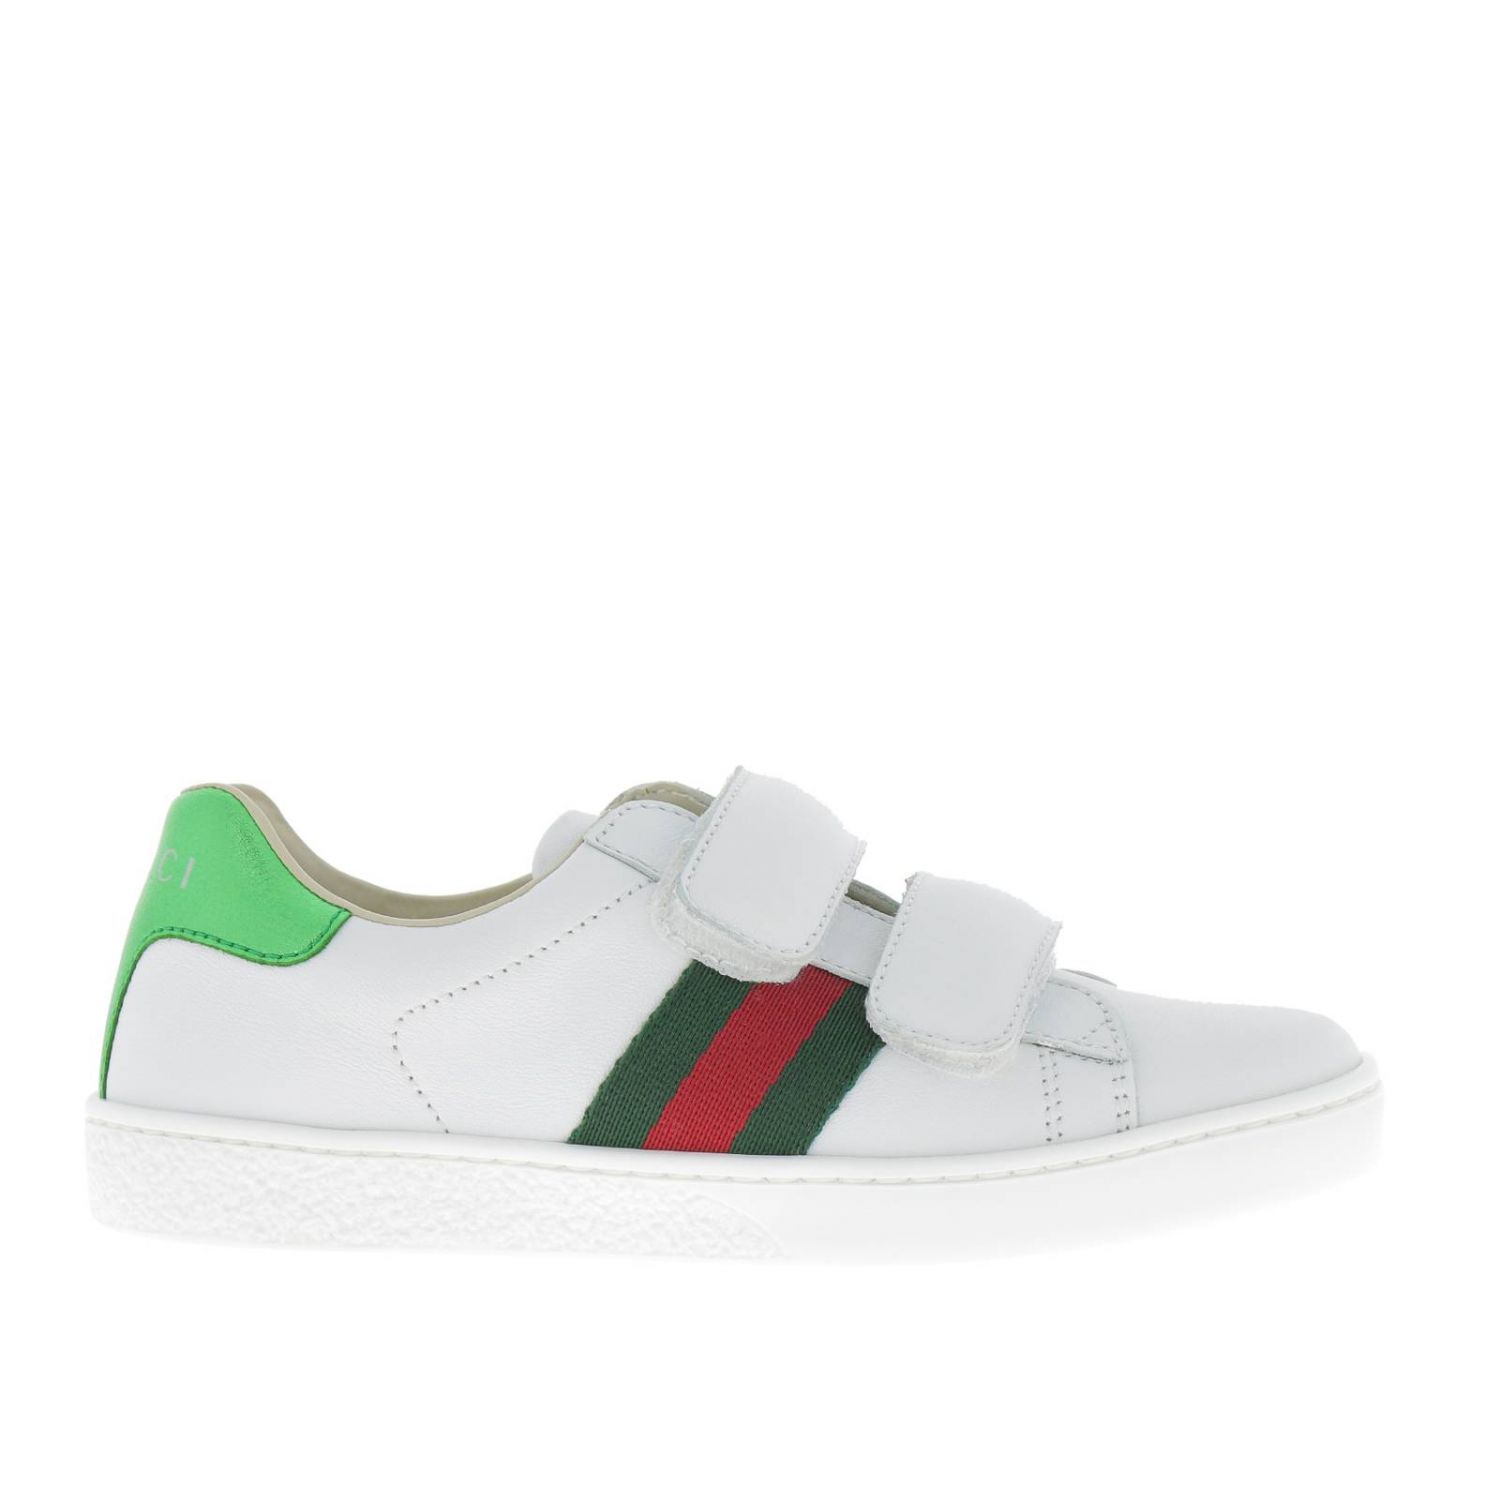 GUCCI: New Ace sneakers in leather with velcro buckles and Web bands ...